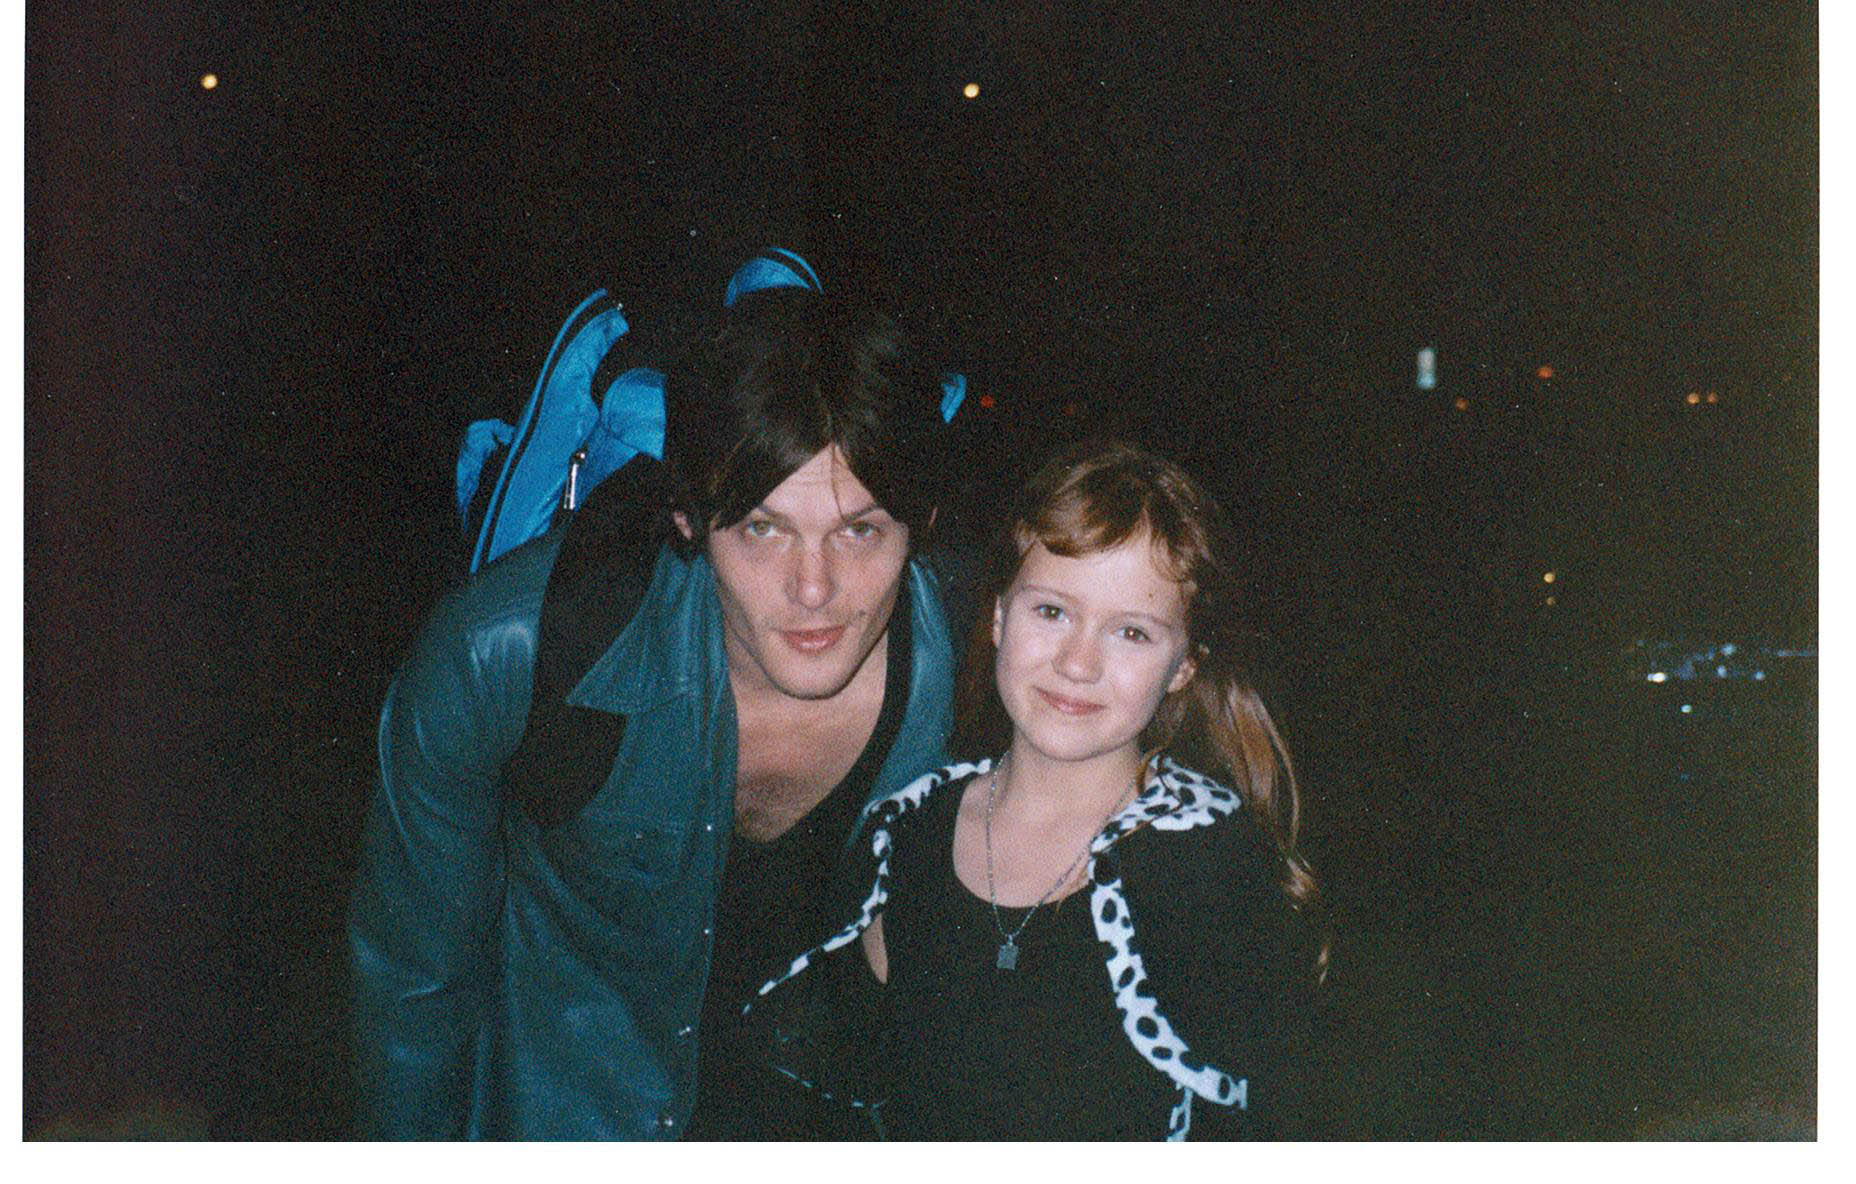 Aria Noelle Curzon with Norman Reedus on set filming Bruce Wagner's 